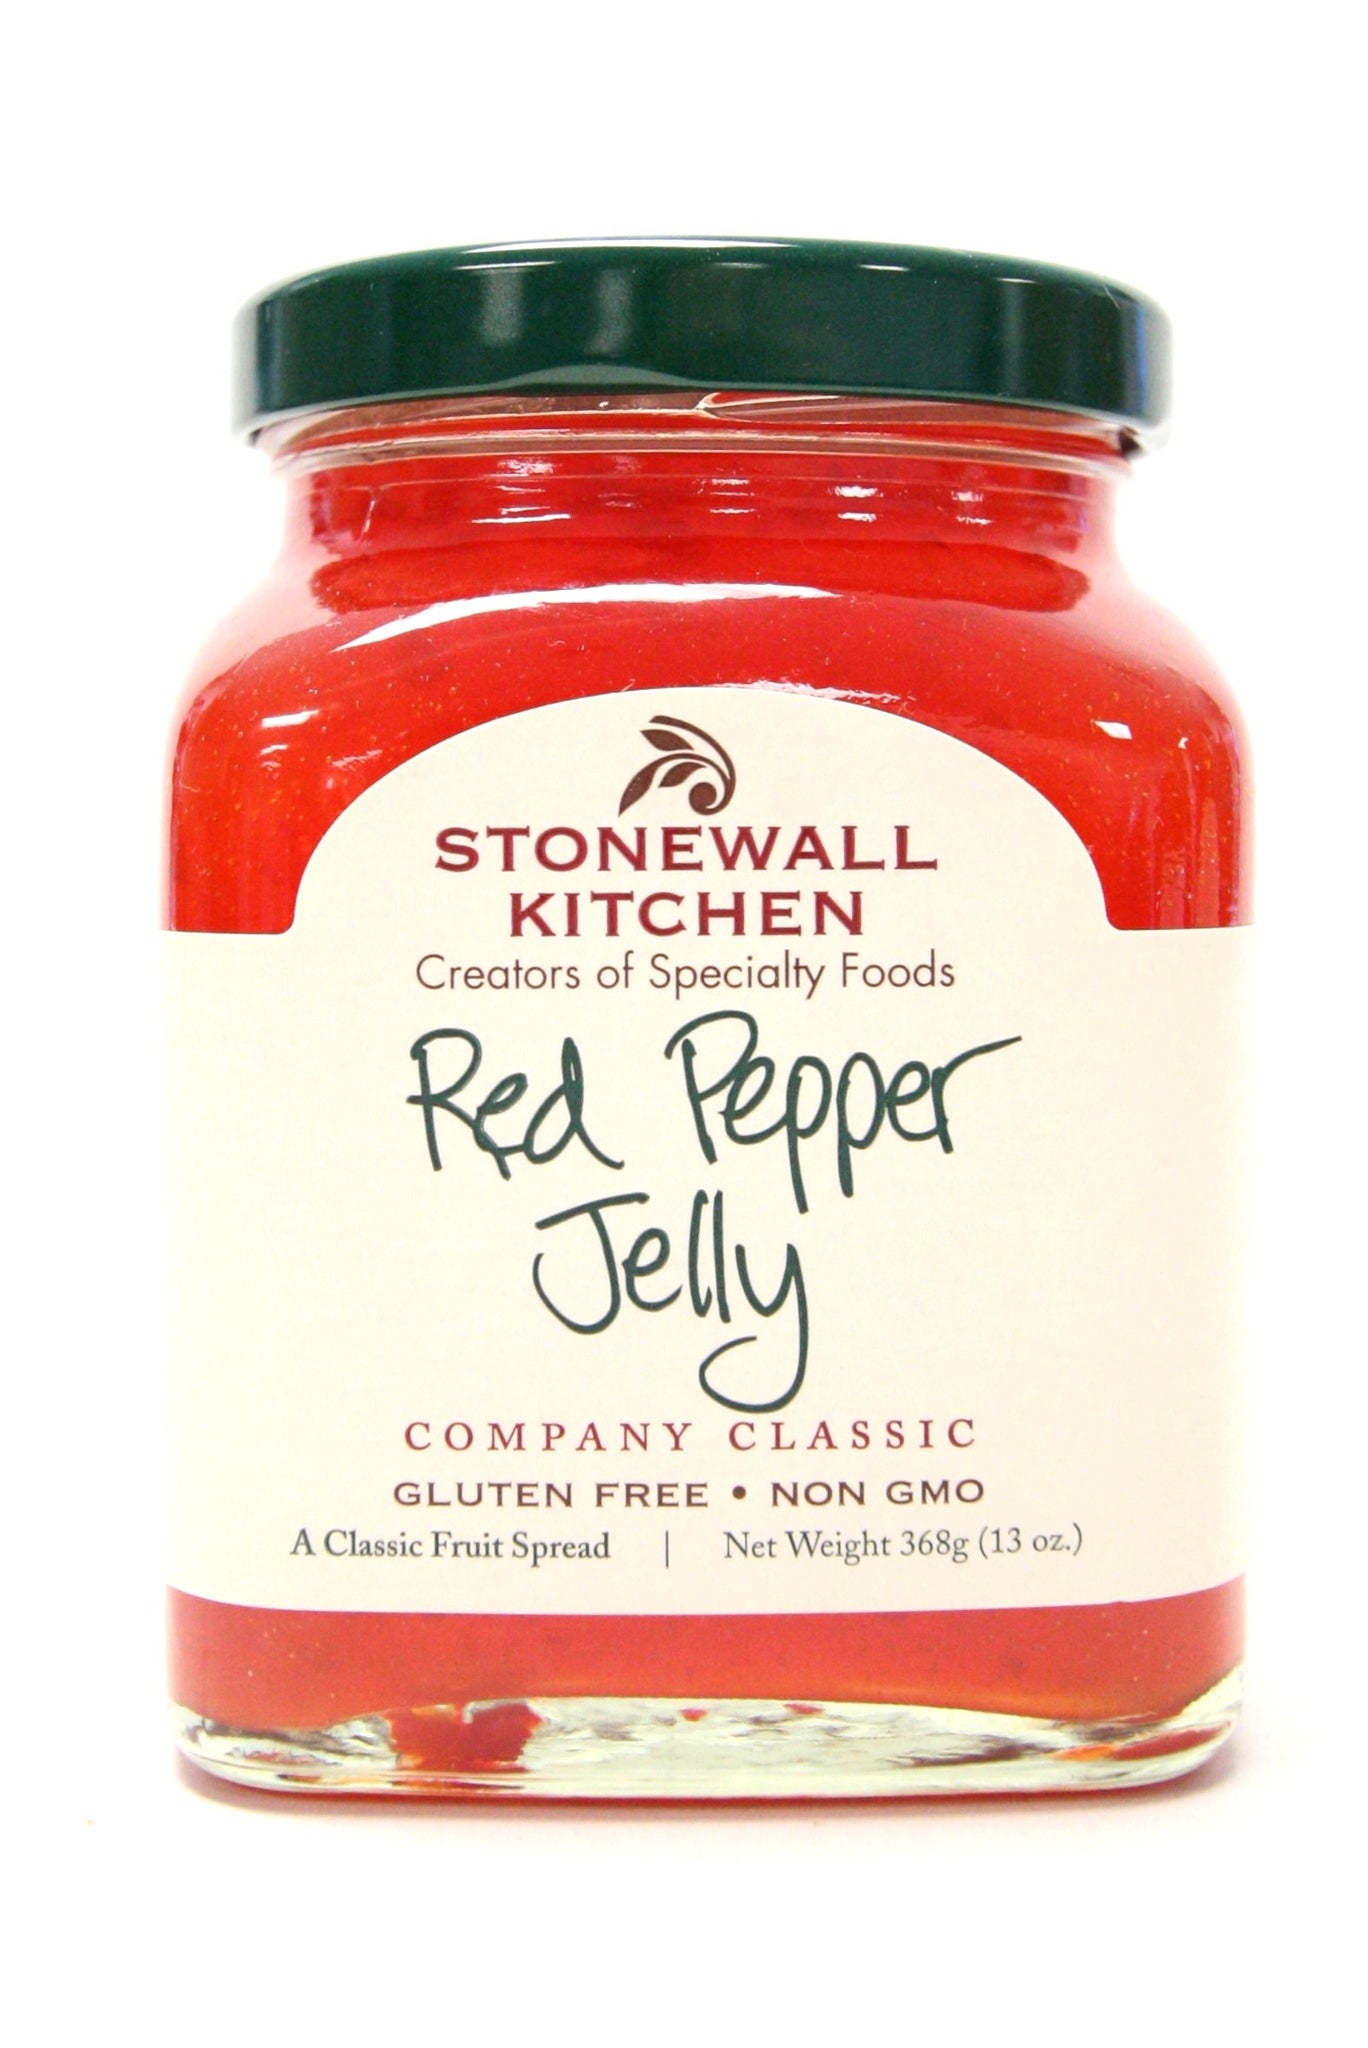 Stonewall Kitchen - Red Pepper Jelly 13 oz.